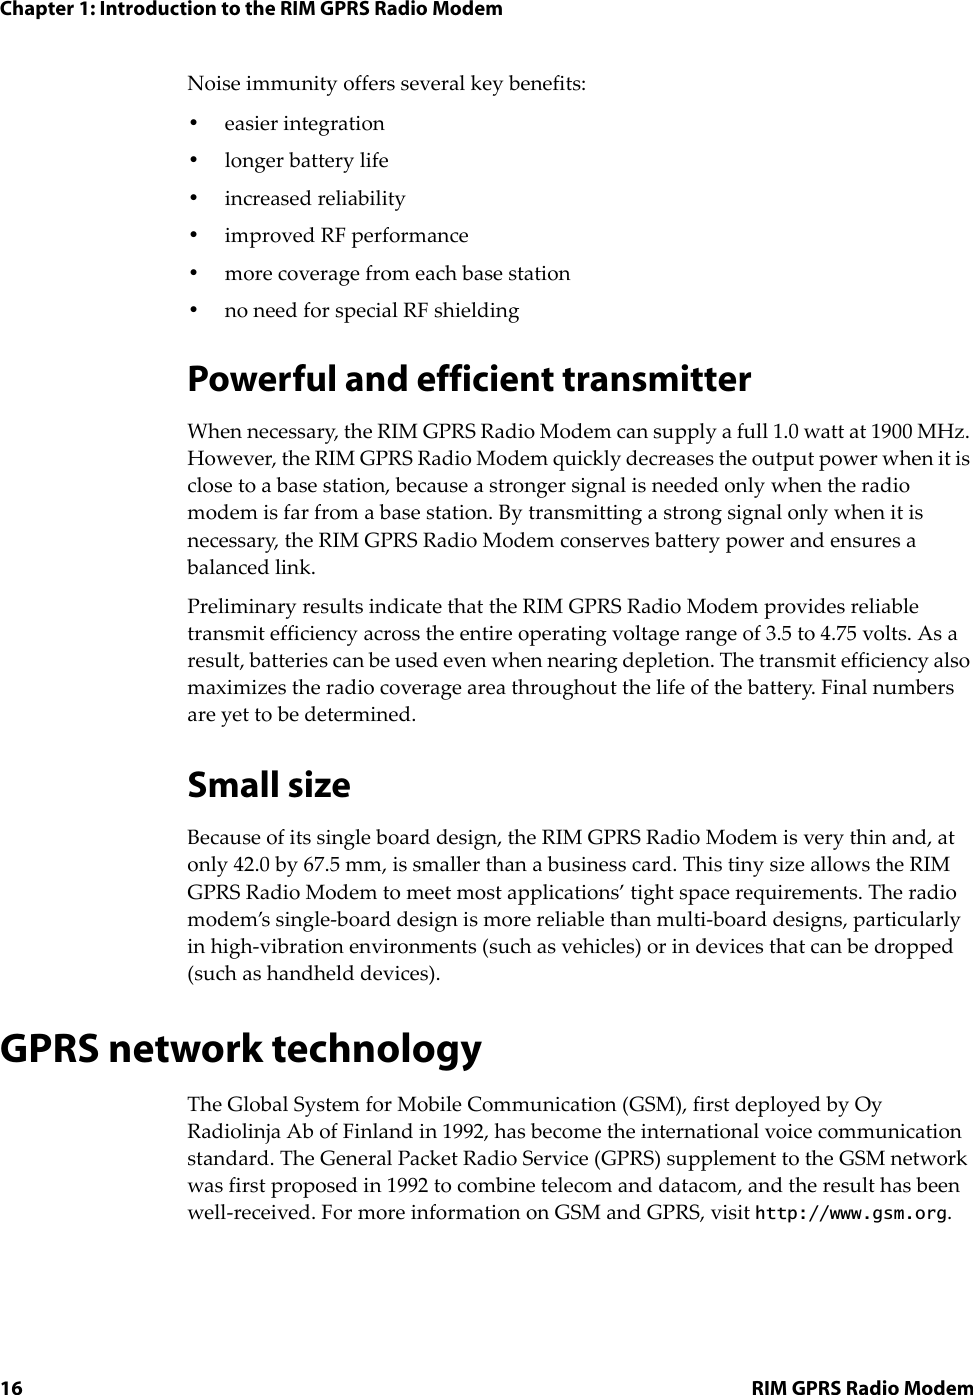 Chapter 1: Introduction to the RIM GPRS Radio Modem16 RIM GPRS Radio ModemNoise immunity offers several key benefits:•easier integration•longer battery life•increased reliability•improved RF performance•more coverage from each base station•no need for special RF shieldingPowerful and efficient transmitterWhen necessary, the RIM GPRS Radio Modem can supply a full 1.0 watt at 1900 MHz. However, the RIM GPRS Radio Modem quickly decreases the output power when it is close to a base station, because a stronger signal is needed only when the radio modem is far from a base station. By transmitting a strong signal only when it is necessary, the RIM GPRS Radio Modem conserves battery power and ensures a balanced link.Preliminary results indicate that the RIM GPRS Radio Modem provides reliable transmit efficiency across the entire operating voltage range of 3.5 to 4.75 volts. As a result, batteries can be used even when nearing depletion. The transmit efficiency also maximizes the radio coverage area throughout the life of the battery. Final numbers are yet to be determined.Small sizeBecause of its single board design, the RIM GPRS Radio Modem is very thin and, at only 42.0 by 67.5 mm, is smaller than a business card. This tiny size allows the RIM GPRS Radio Modem to meet most applications’ tight space requirements. The radio modem’s single-board design is more reliable than multi-board designs, particularly in high-vibration environments (such as vehicles) or in devices that can be dropped (such as handheld devices).GPRS network technologyThe Global System for Mobile Communication (GSM), first deployed by Oy Radiolinja Ab of Finland in 1992, has become the international voice communication standard. The General Packet Radio Service (GPRS) supplement to the GSM network was first proposed in 1992 to combine telecom and datacom, and the result has been well-received. For more information on GSM and GPRS, visit http://www.gsm.org.